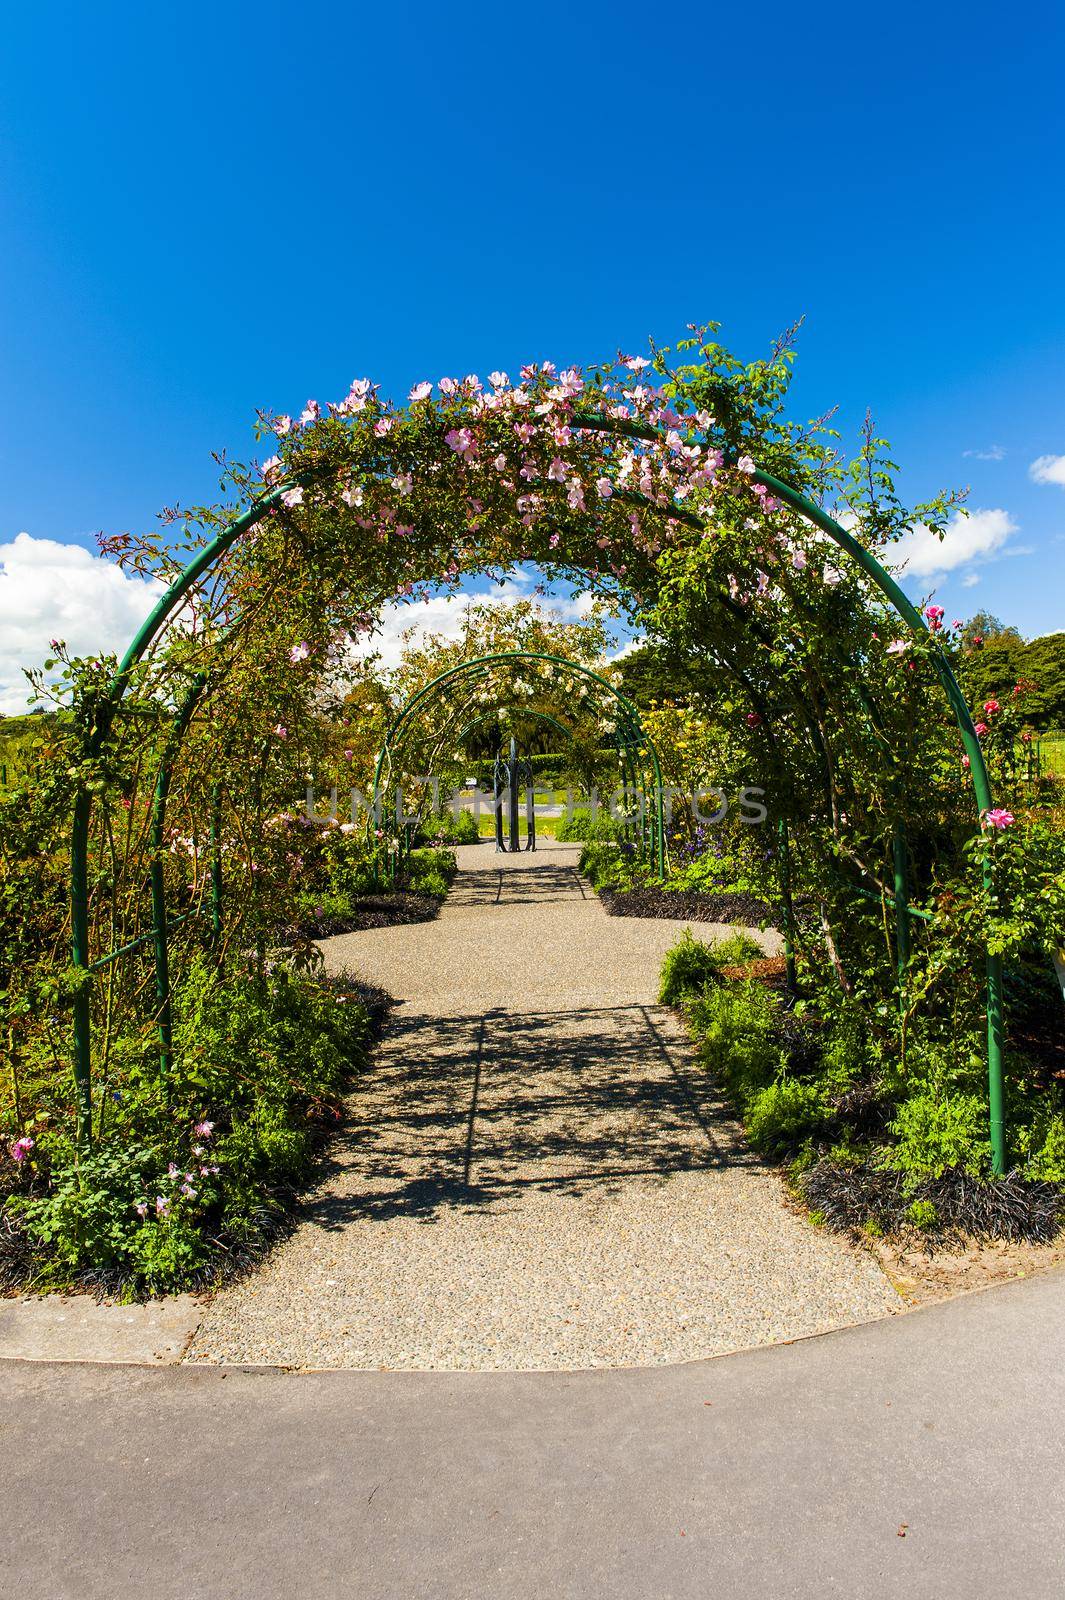 Beautiful red roses creating arch over the path in a garden